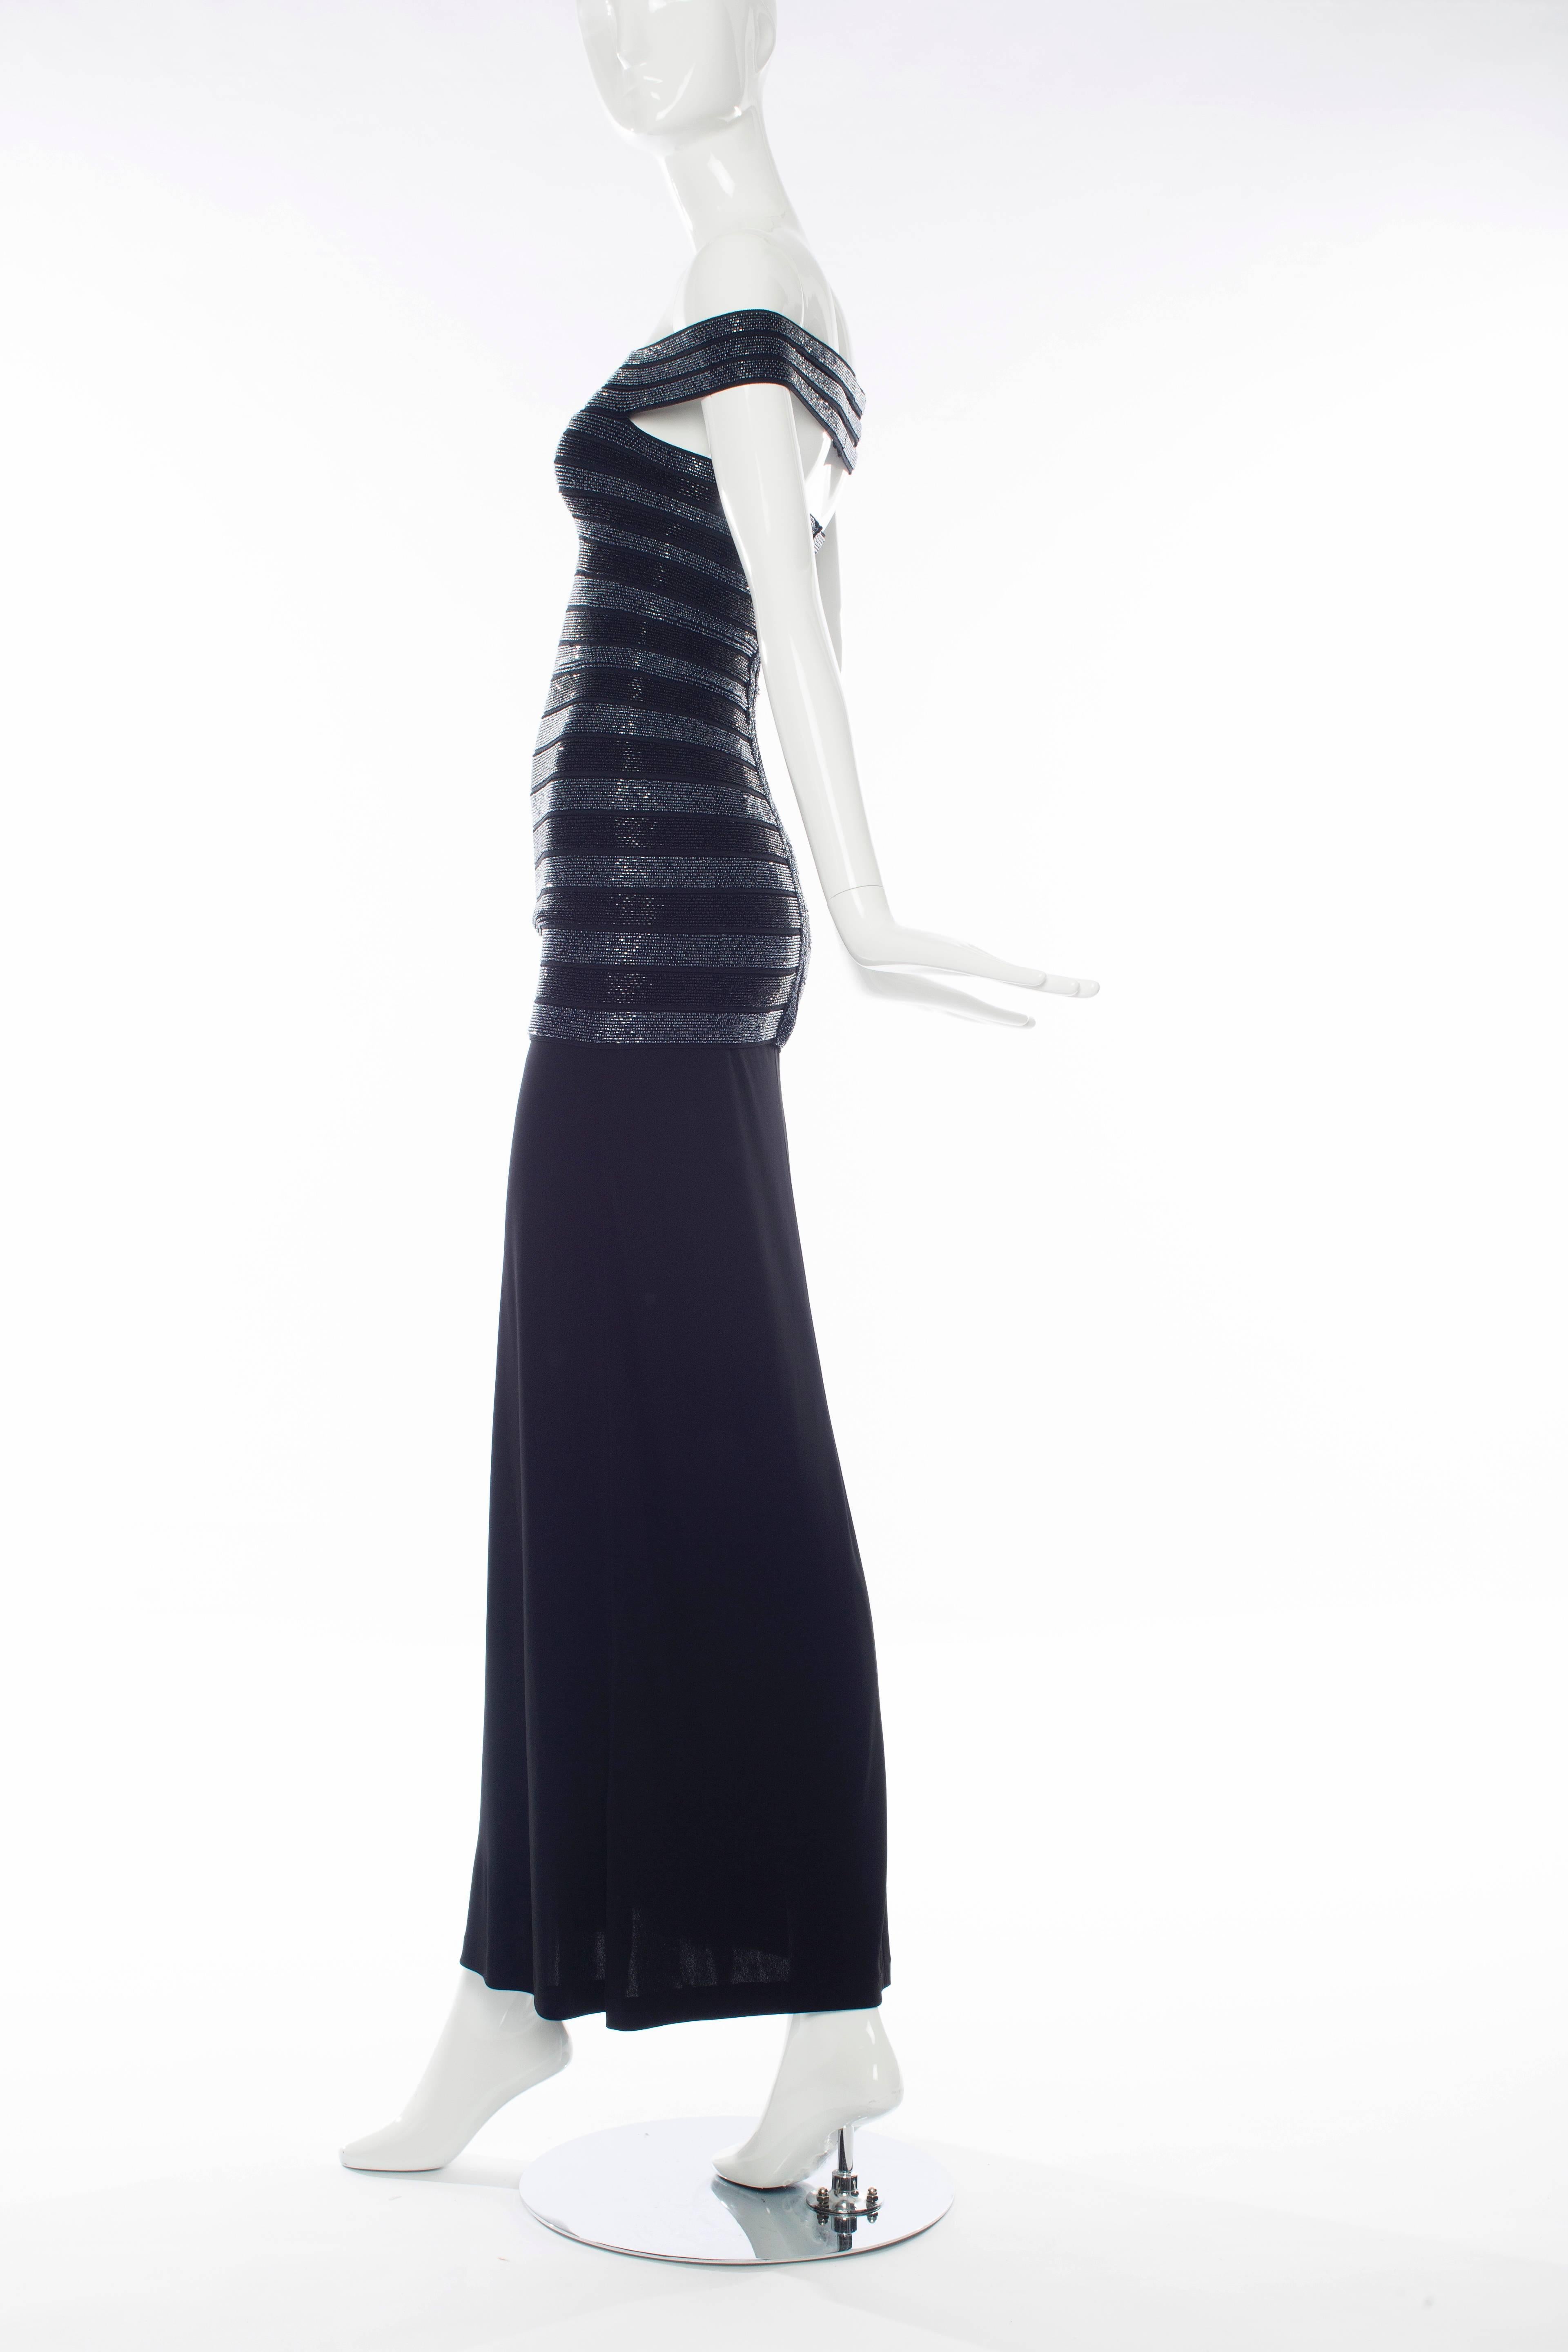 Herve Leger Couture black gown with black and charcoal beading,side zipper with hook and eye clasp.